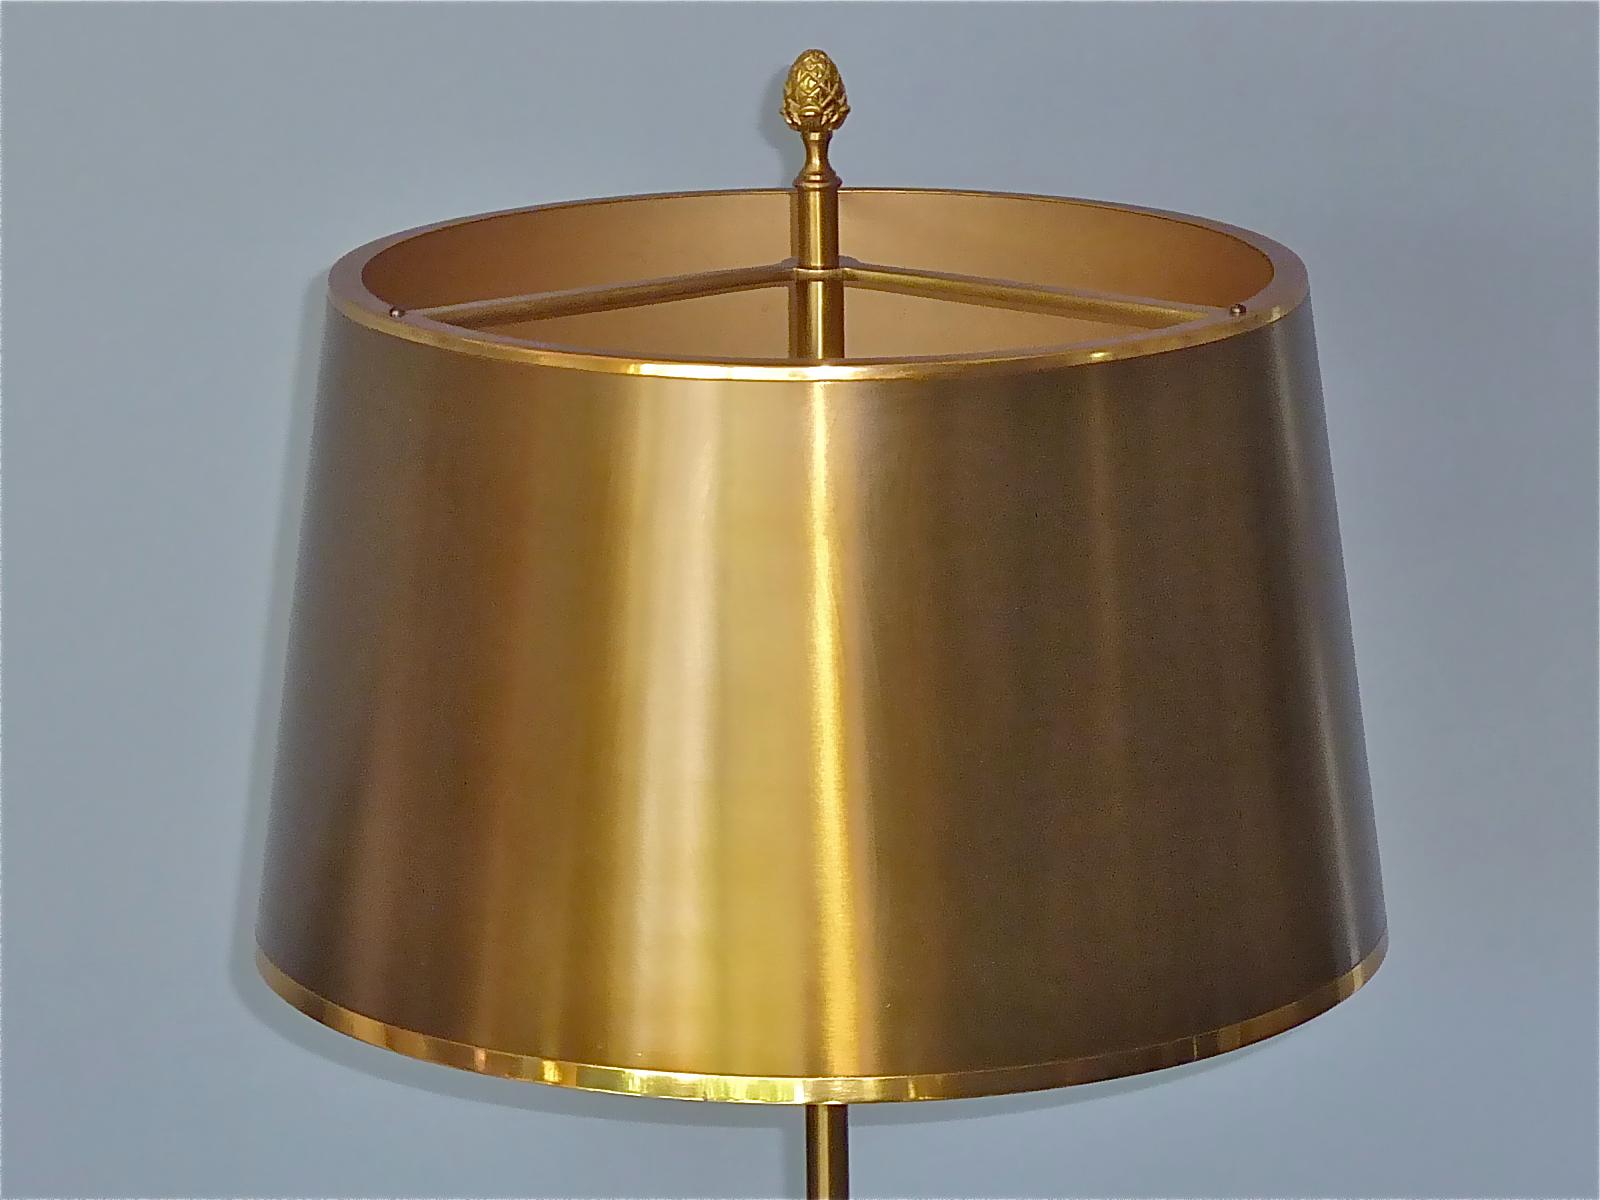 Brass Rare Signed Gilt Bronze French Table Lamp Maison Charles Pomgranate 1970s Jansen For Sale